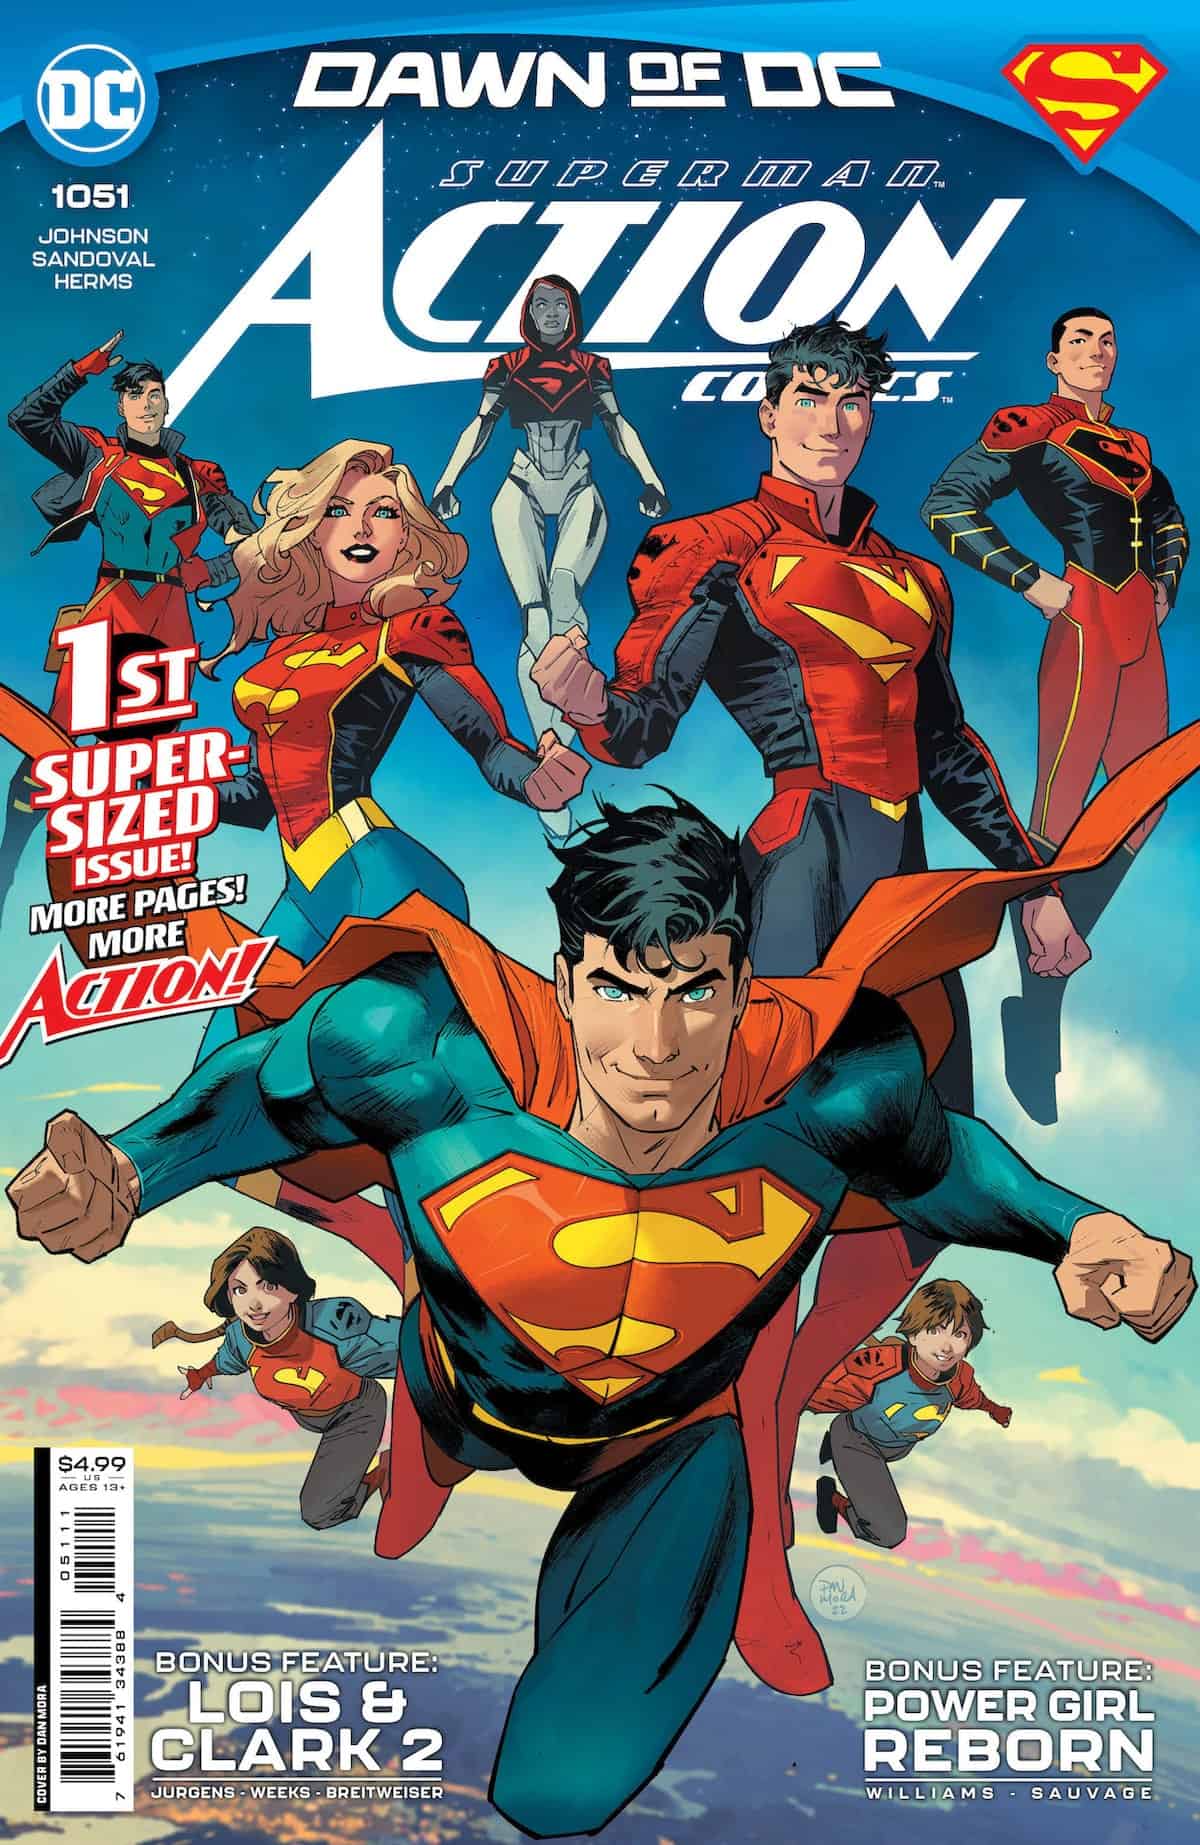 Action Comics #1051: Dawn of the Superfamily - Comic Watch